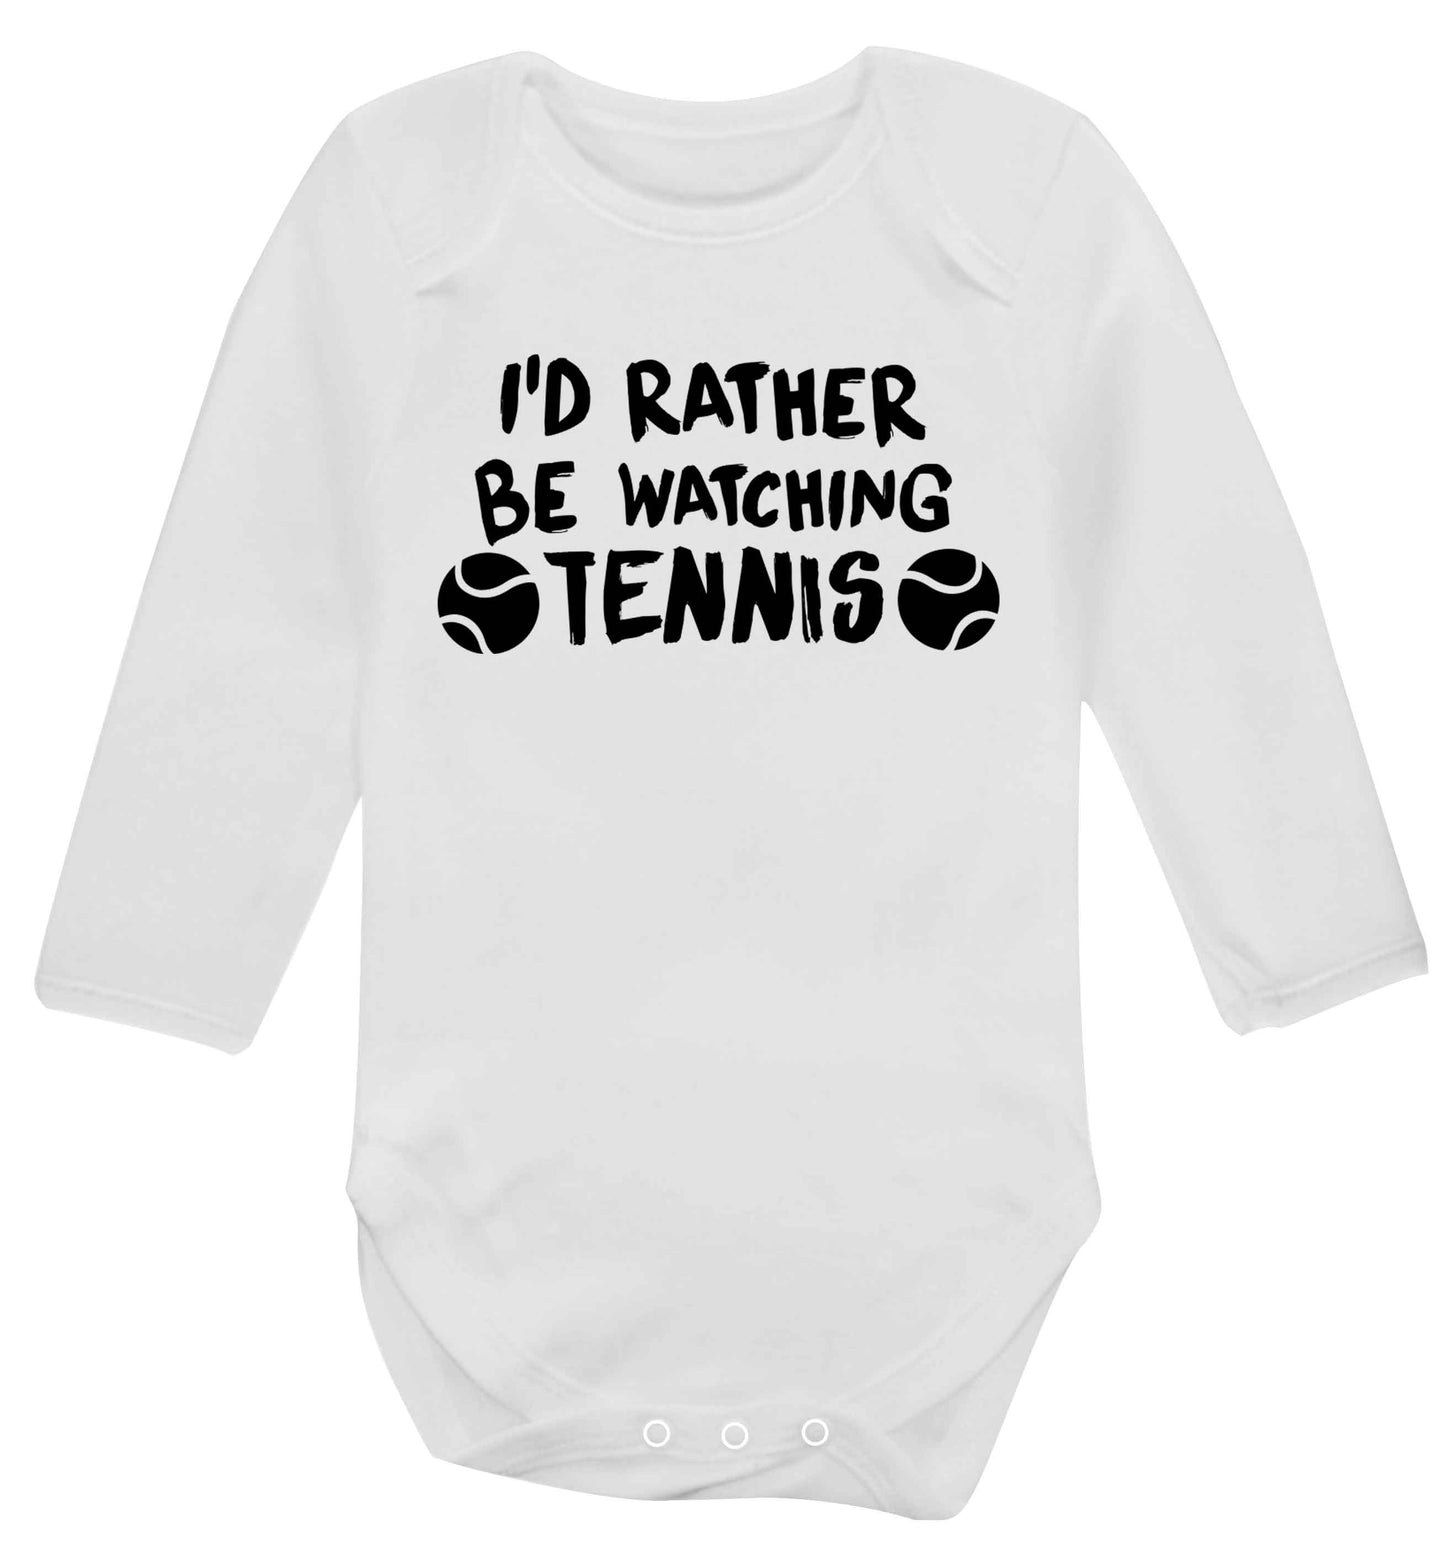 I'd rather be watching the tennis Baby Vest long sleeved white 6-12 months